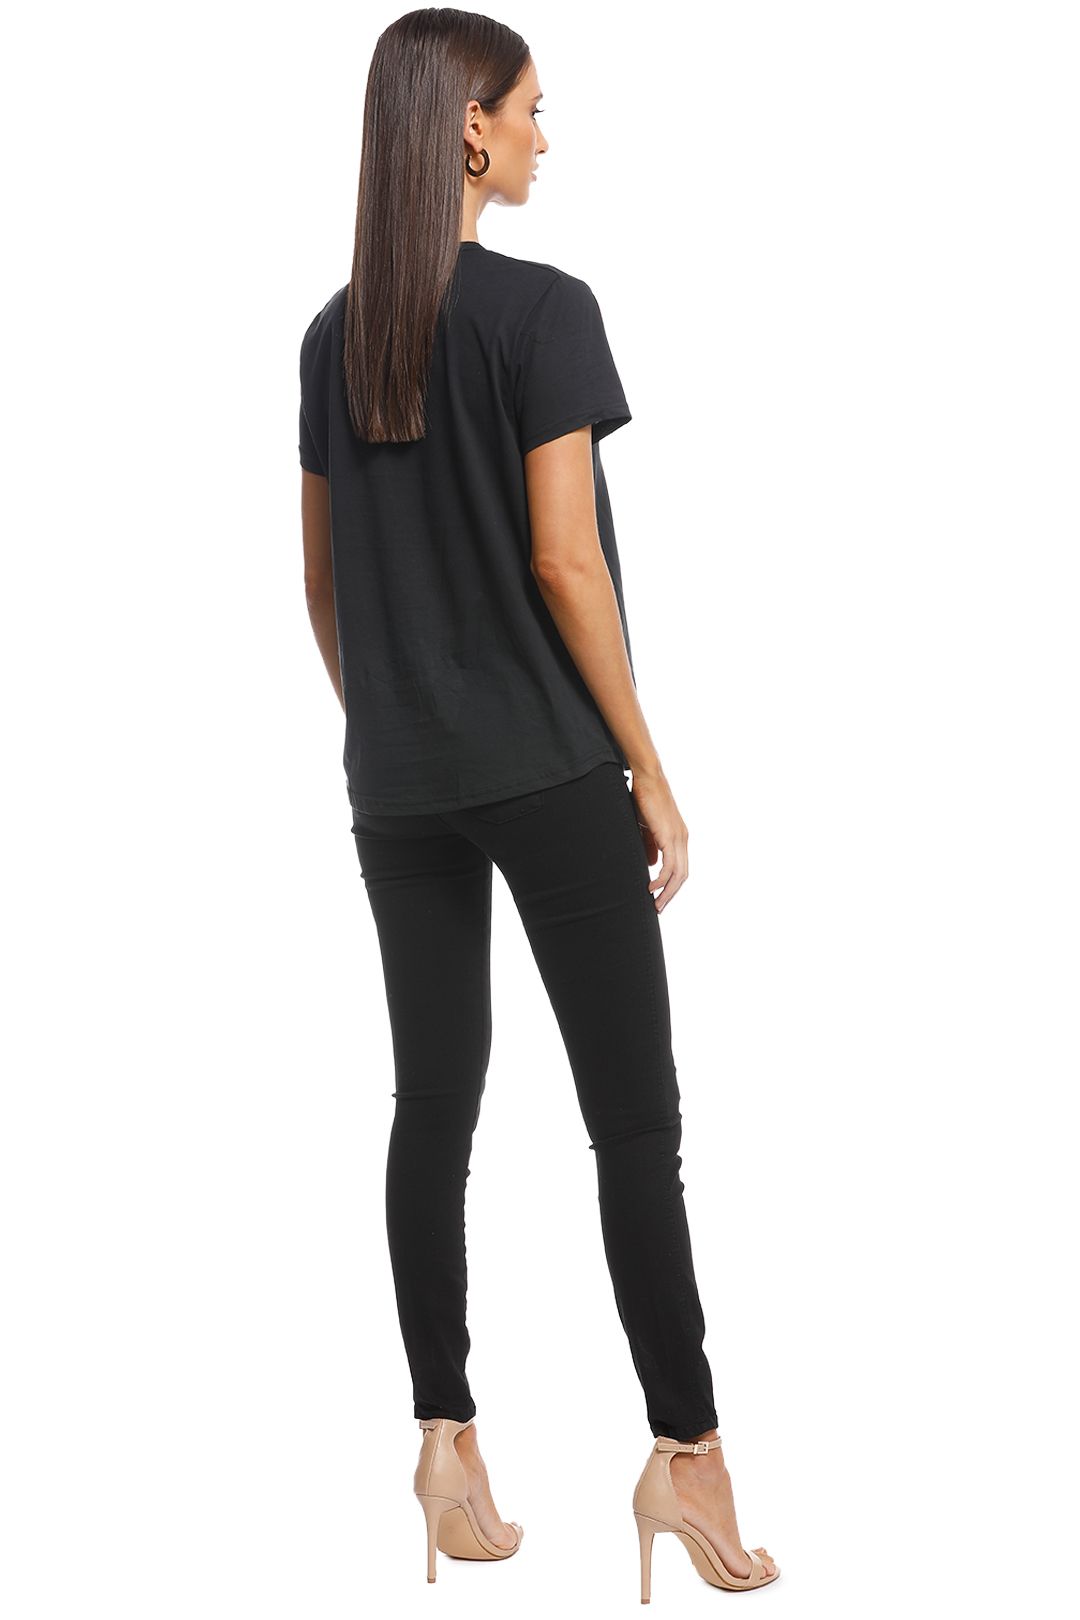 Camilla and Marc - Fay Crest Tee - Black - Back